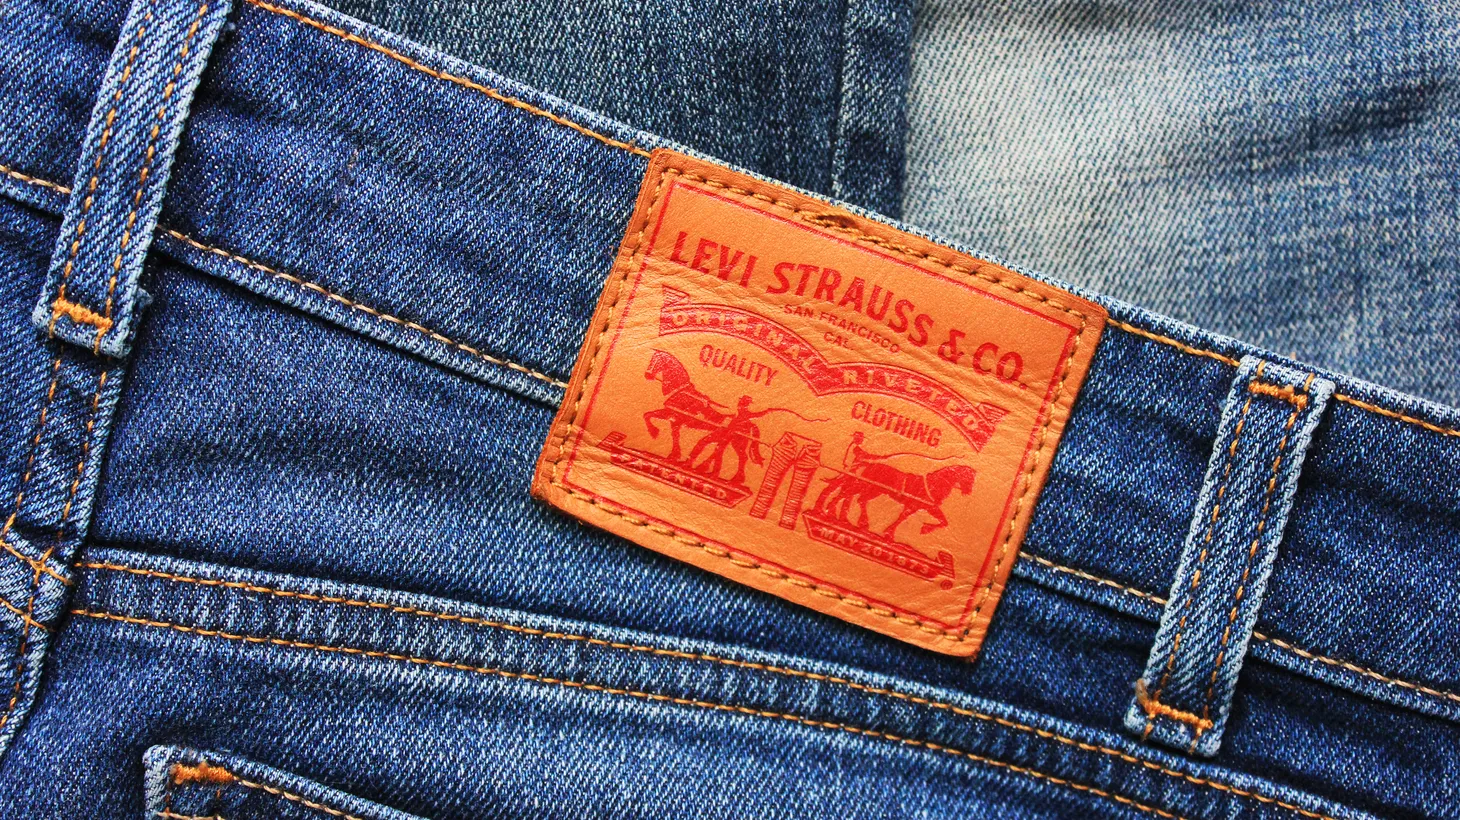 elk Arabisch Ontwikkelen Pair of Levi's jeans — with racist slogan — becomes history lesson